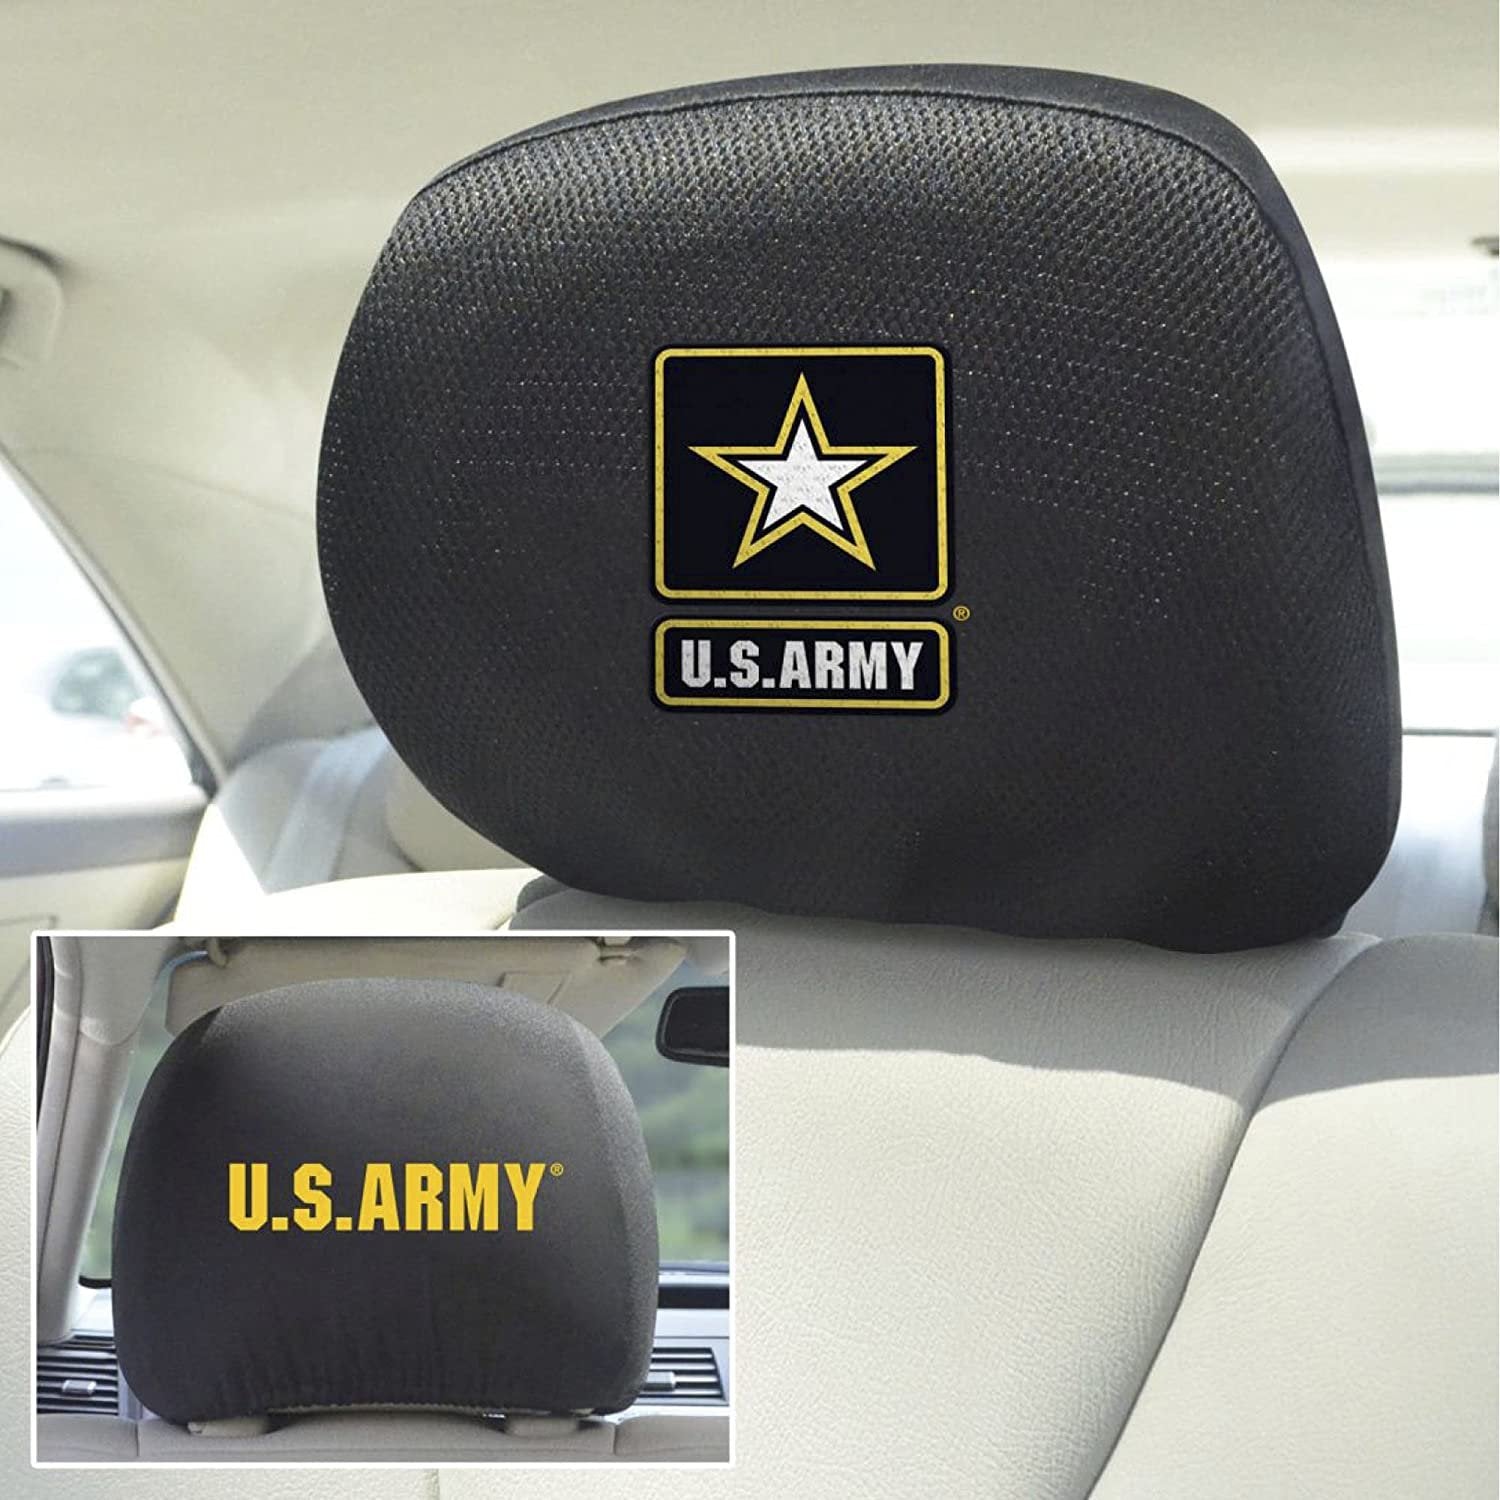 United States Army Military Pair of Premium Auto Head Rest Covers, Embroidered, Black Elastic, 14x10 Inch